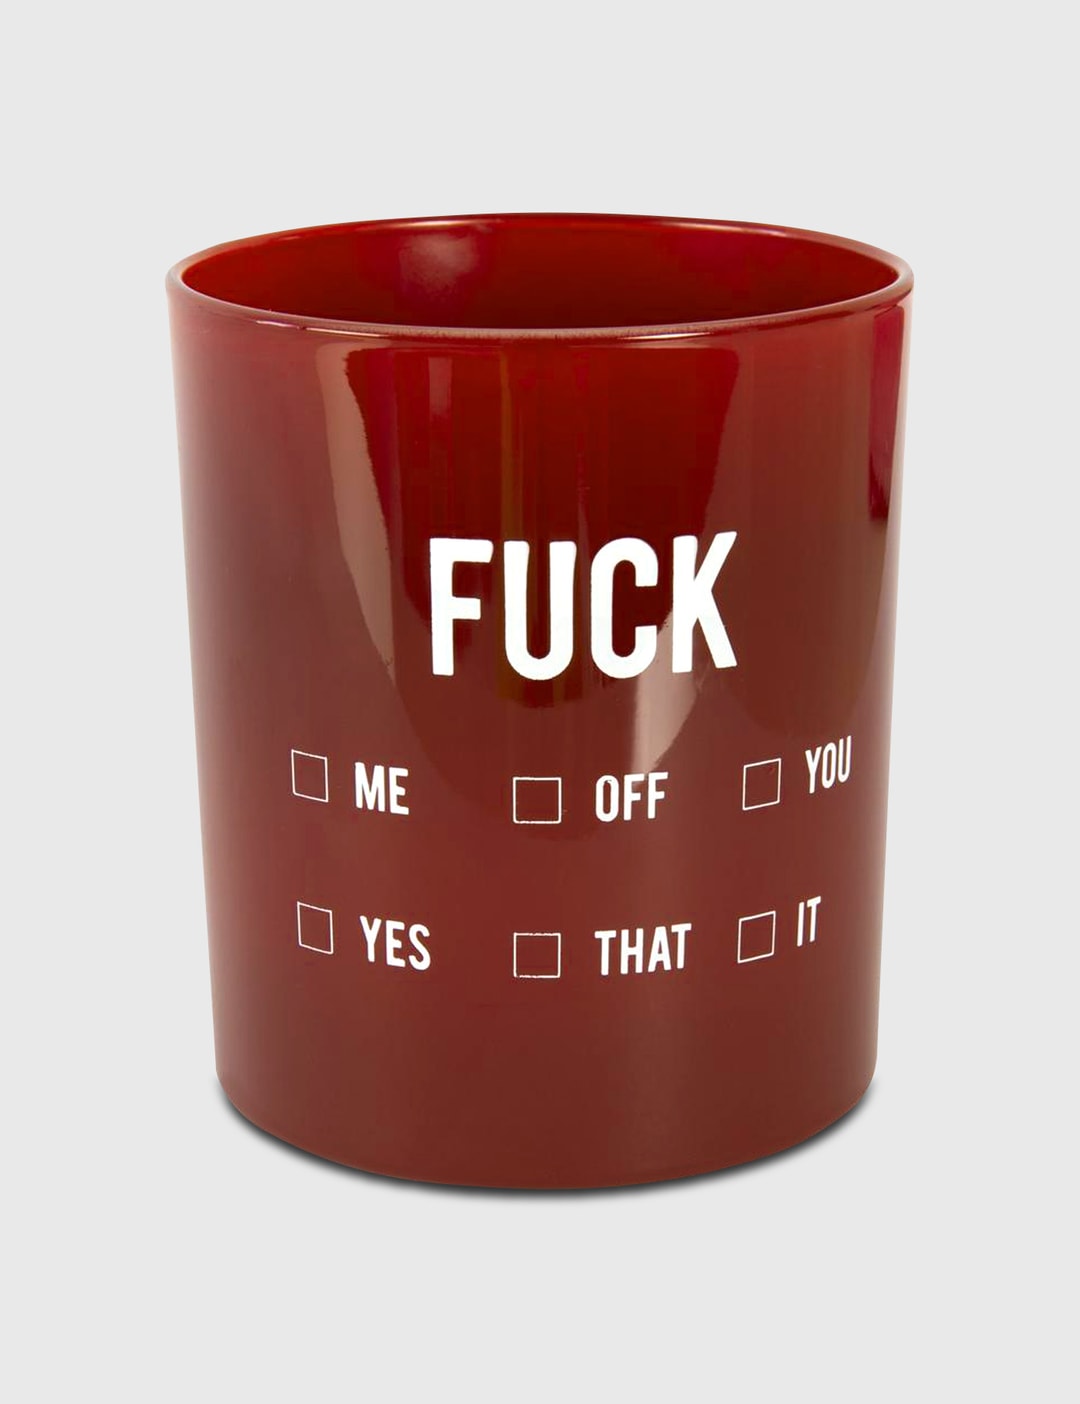 "Fuck" Candle – Red & White Placeholder Image